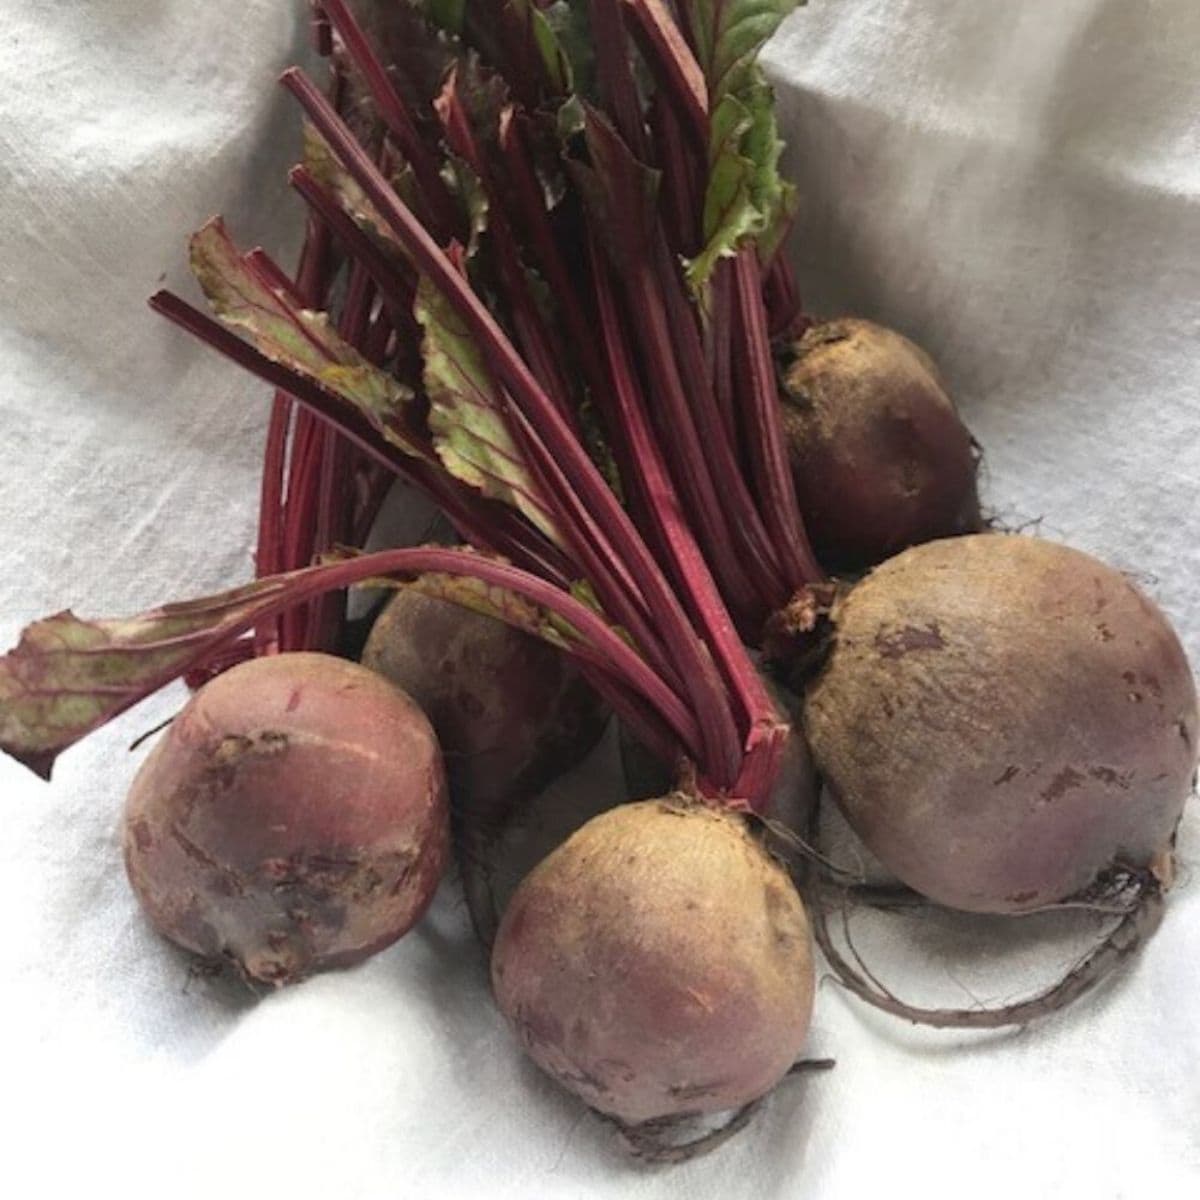 A bunch of raw beets on white cloth.